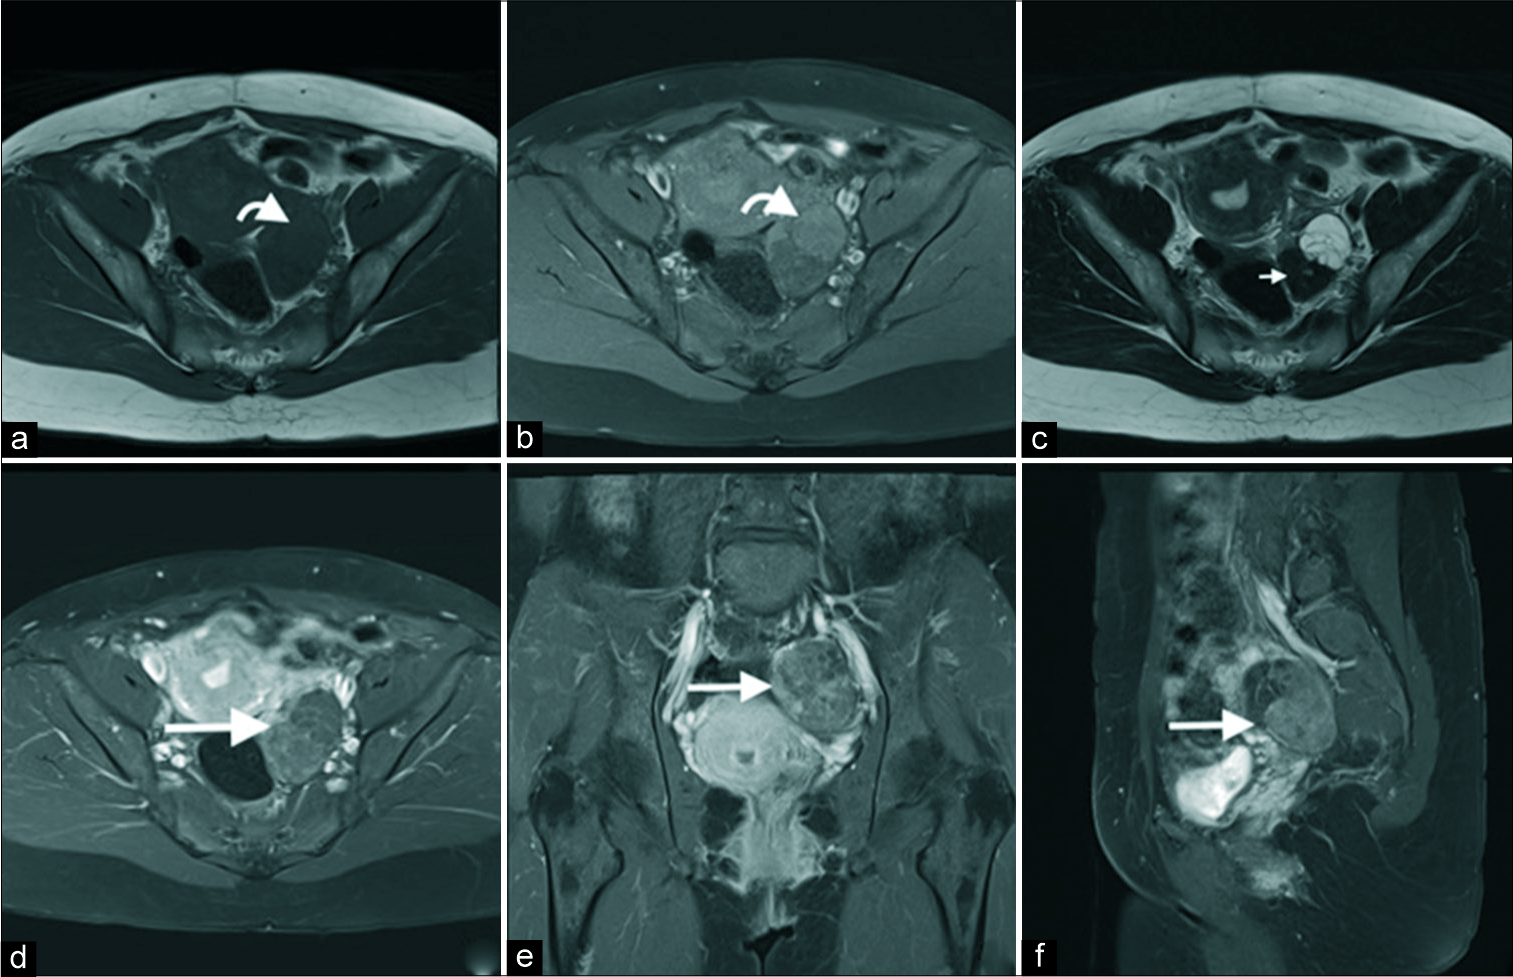 A 40-year-old female with an incidental left adnexal lesion on ultrasound underwent subsequent magnetic resonance imaging (MRI). Axial T1 (a), T1 fat saturation (b), T2 (c), axial (d), coronal (e), and sagittal post-gadolinium MRI sequences demonstrate an enhancing cystic (anterior) and solid (posterior) lesion (d-f, long arrow) with mild T1 hyperintensity of the cystic component (a and b, curved arrow) and markedly T2 hypointensity of the dominant solid fibrous component (c, short arrow). No central necrosis was present.